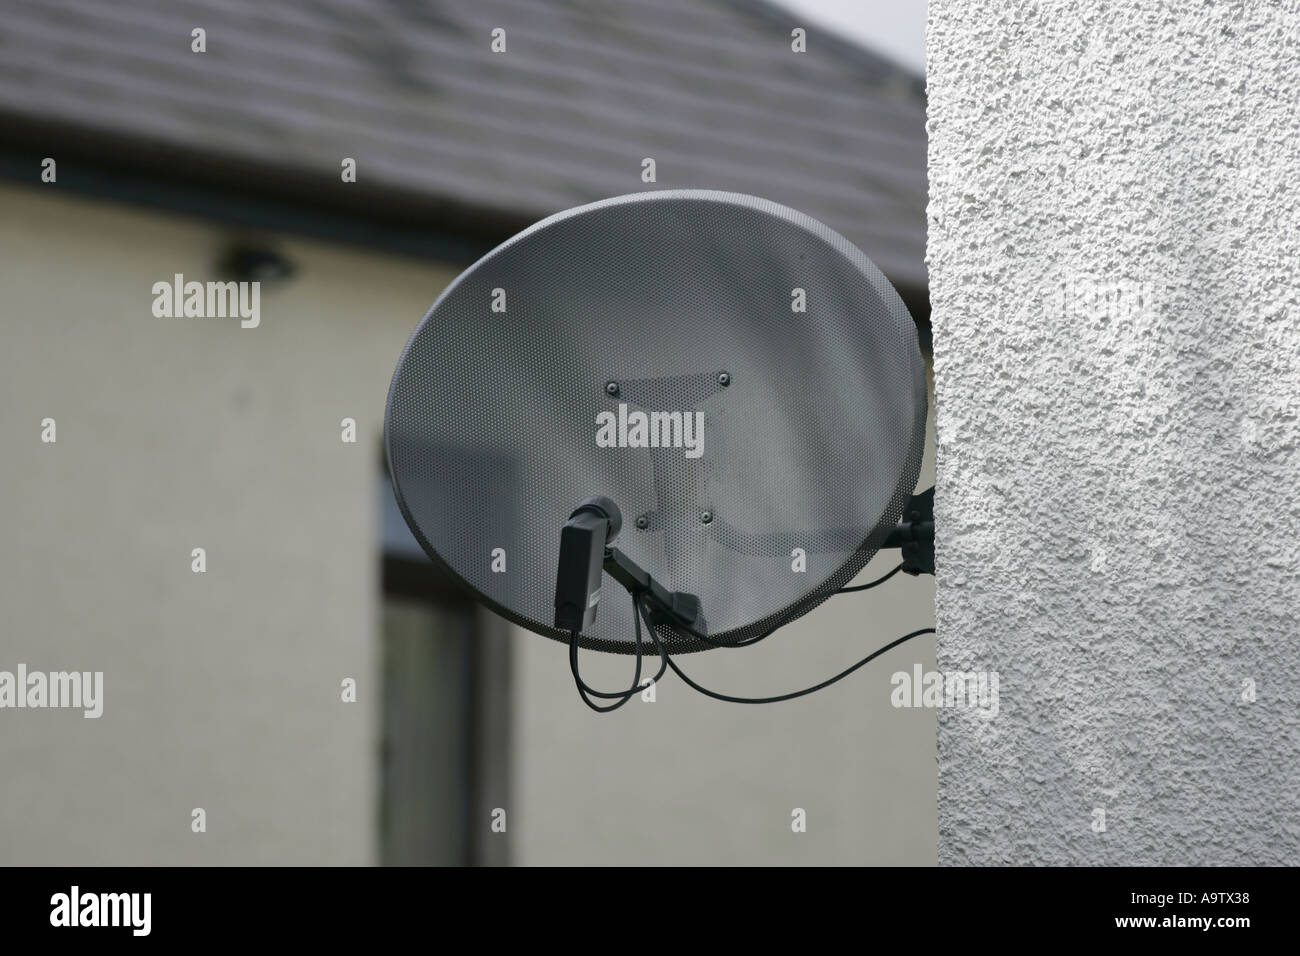 Satellite dish on side of house with pebbledash walls Stock Photo